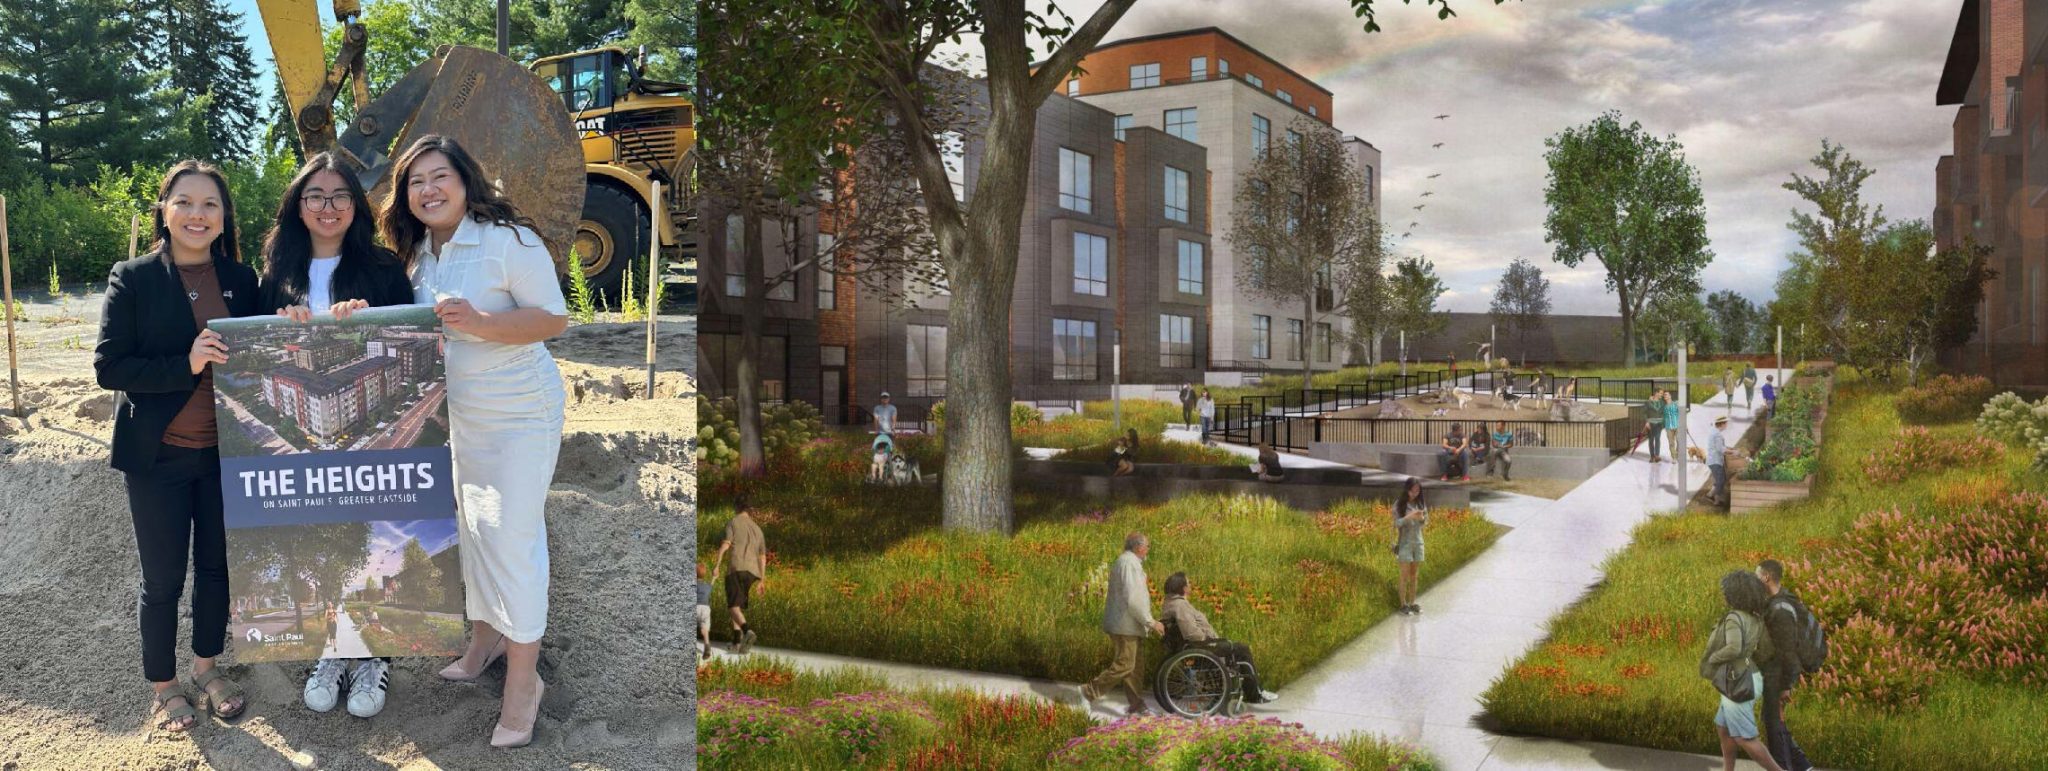 Groundbreaking and artist rendering of The Heights development, whose district geothermal system received the first award from Minnesota's new green bank. Photo credit: The Heights Community Energy